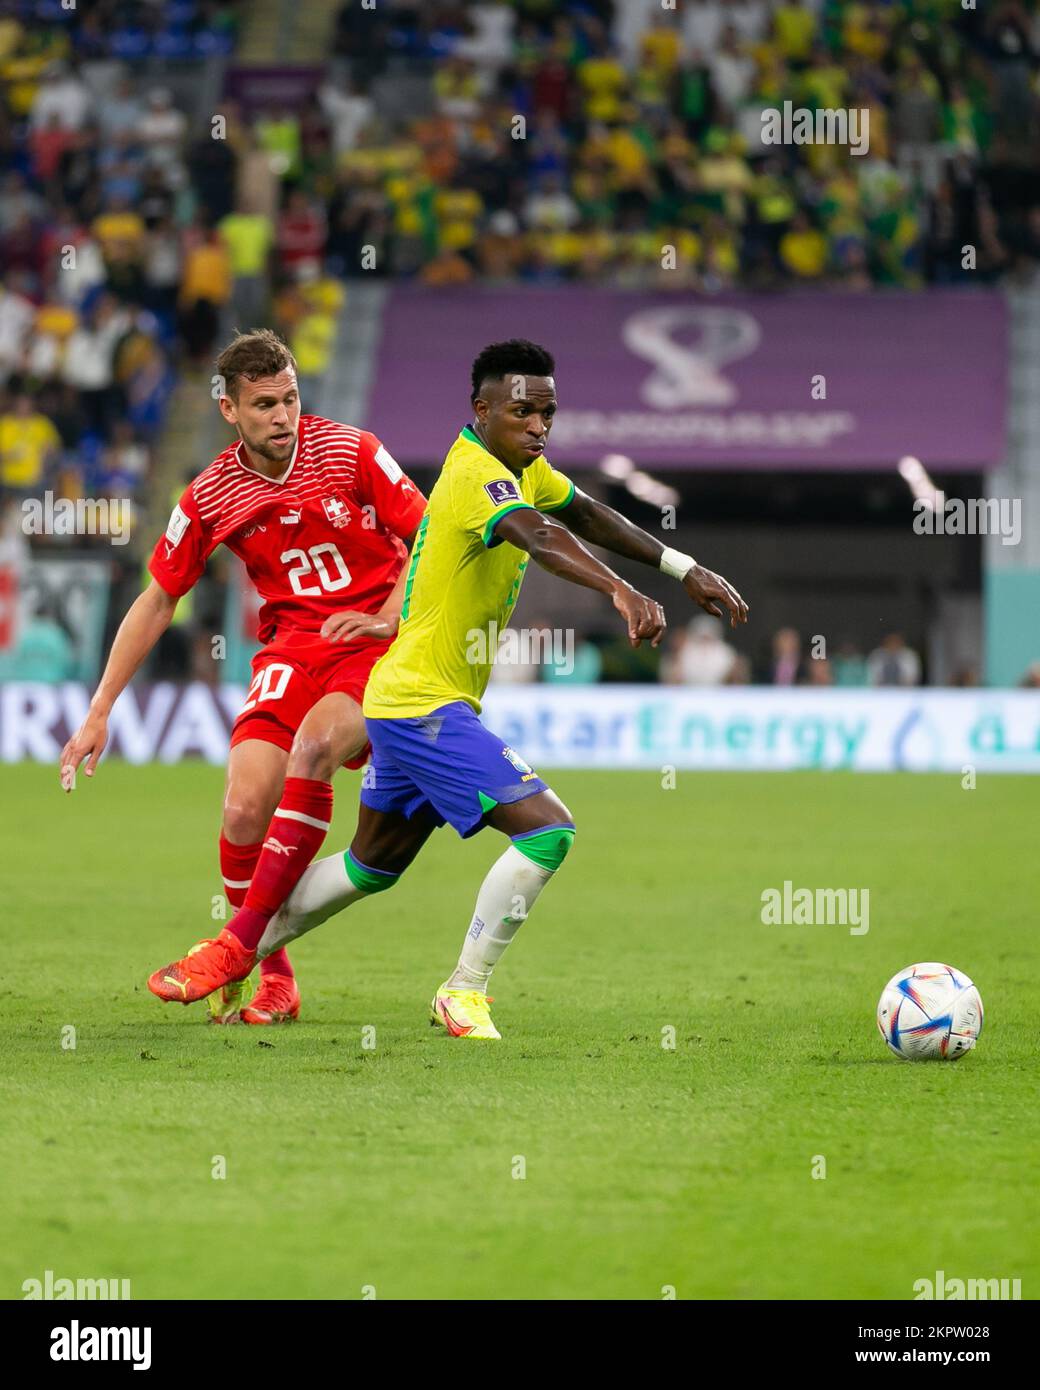 DOHA, QATAR - NOVEMBER 28: Player of Brazil Vinícius Júnior fights for the ball with player of Switzerland Fabian Frei during the FIFA World Cup Qatar 2022 group G match between Brazil and Switzerland at Stadium 974 on November 28, 2022 in Doha, Qatar. (Photo by Florencia Tan Jun/PxImages) Stock Photo